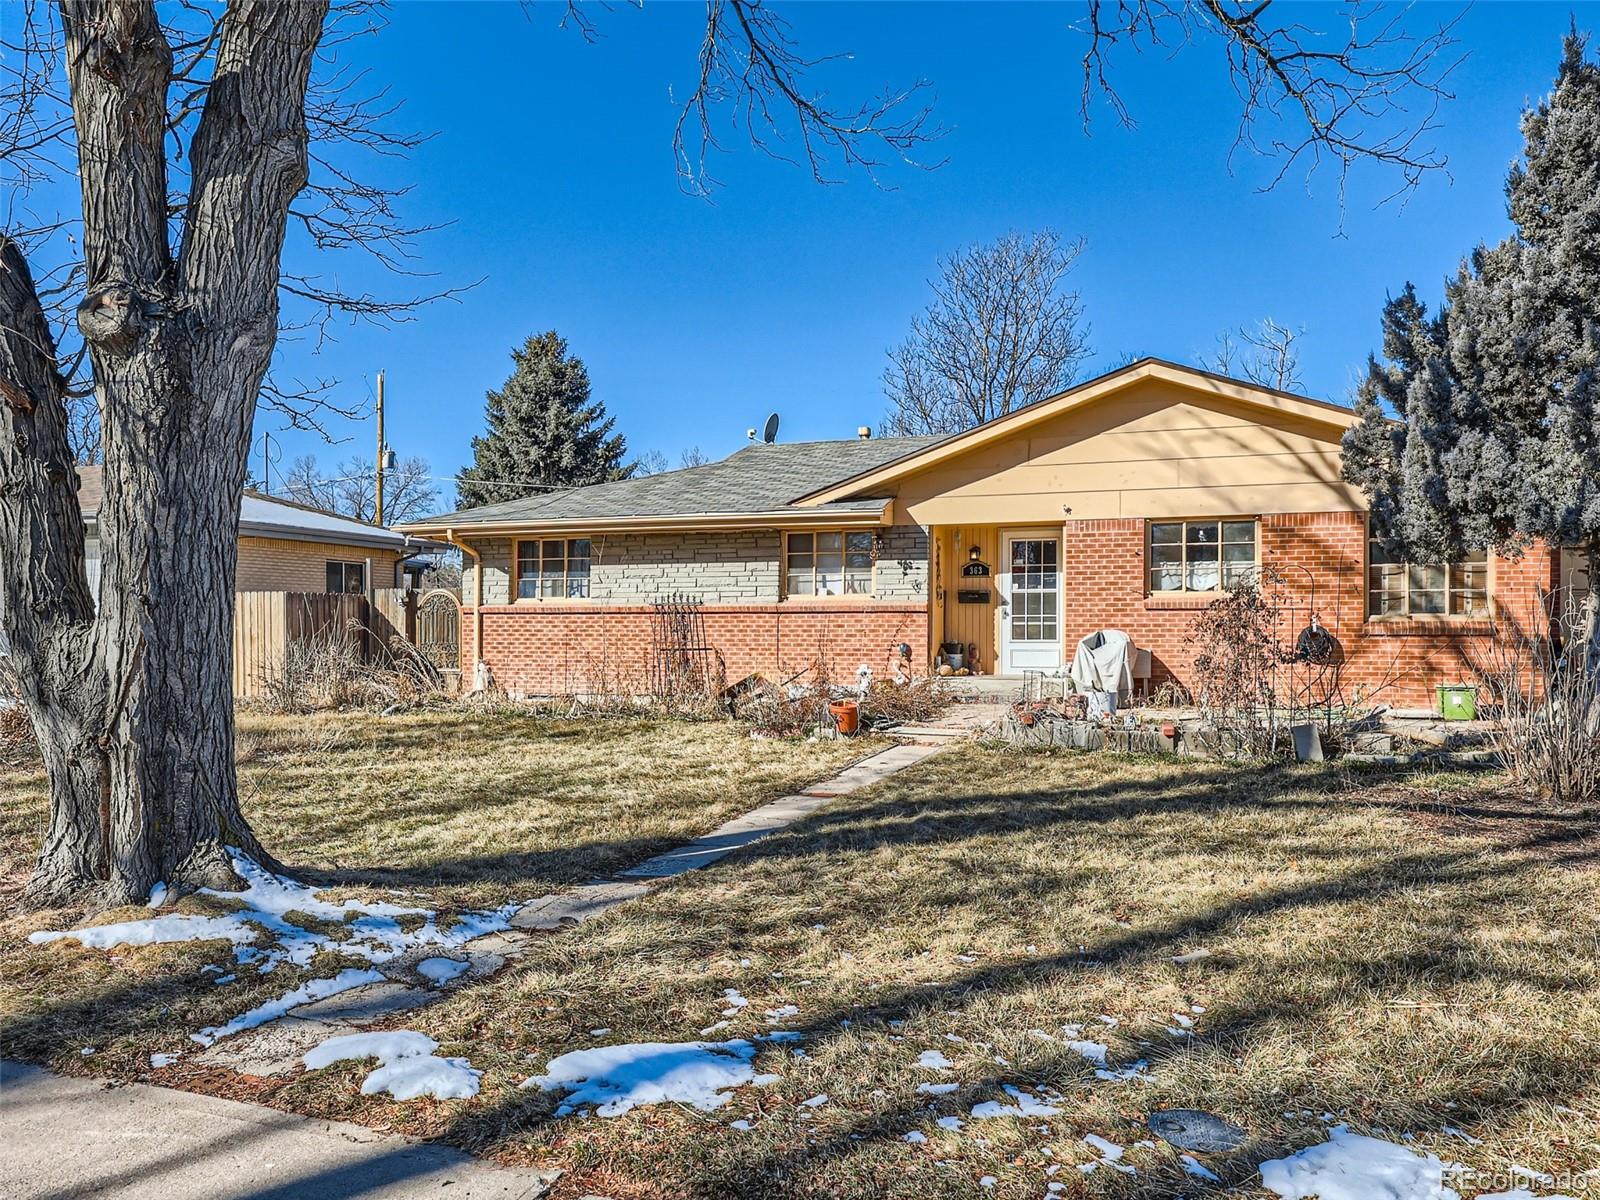 363  lima street, aurora sold home. Closed on 2024-03-08 for $391,693.